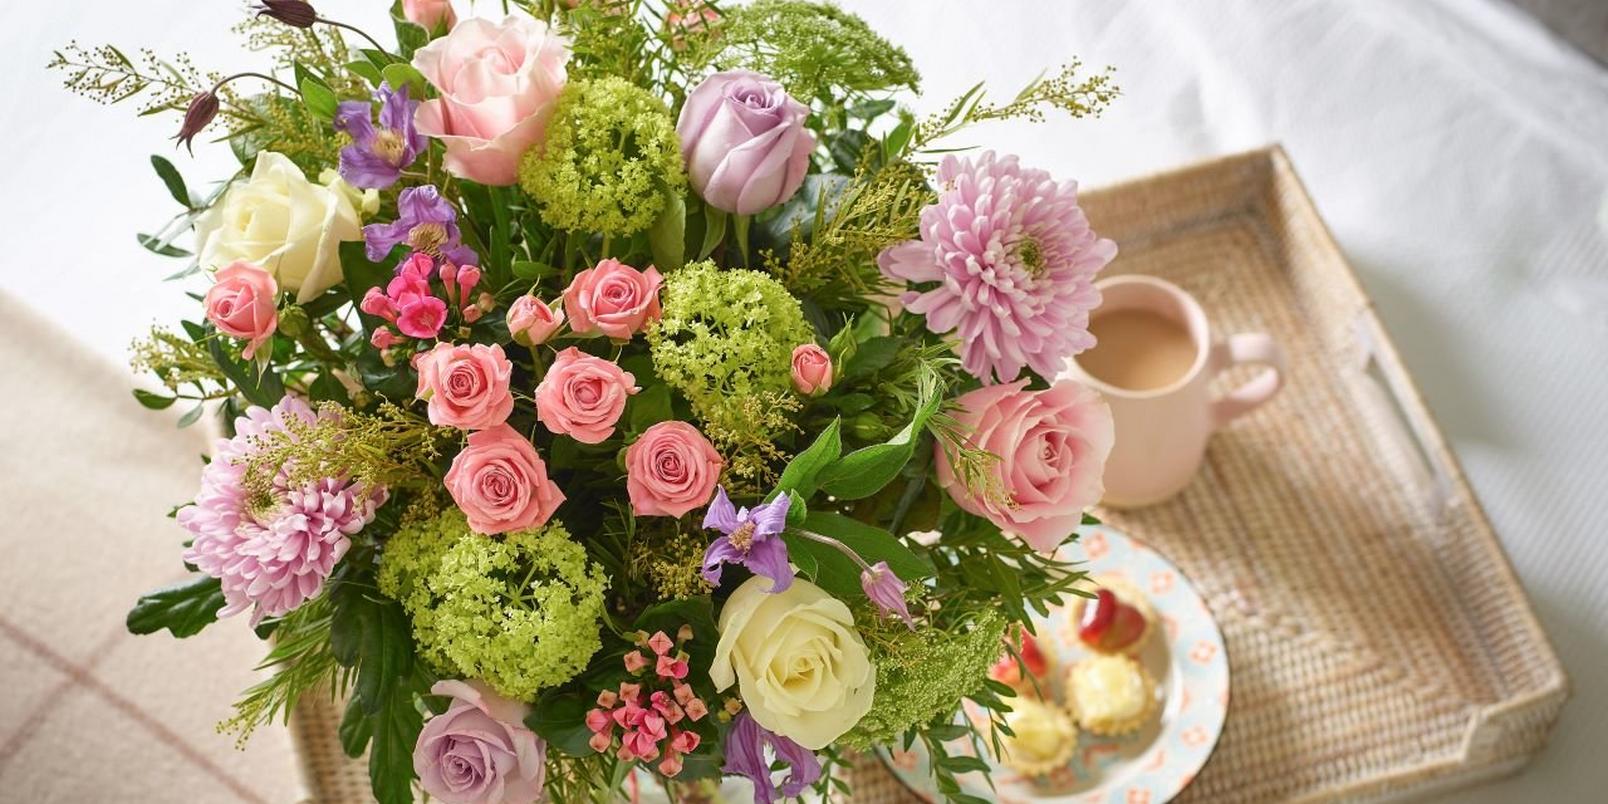 Mothers-day-flowers-by-florist-2